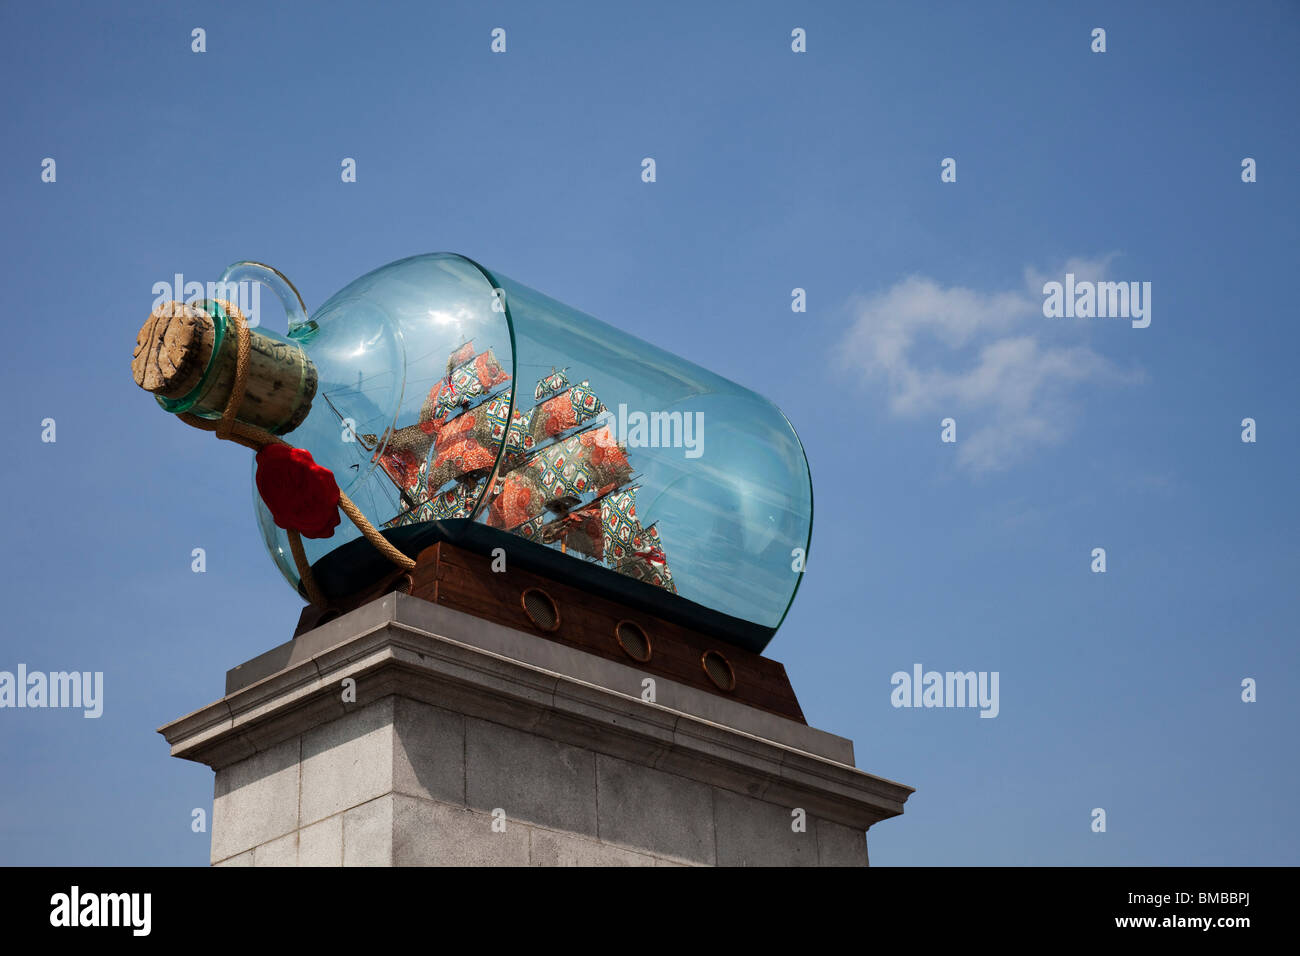 Victory in a bottle and made by artist Yinka Shonibare, is the latest addition to the fourth plinth in Trafalgar Square, London. Stock Photo